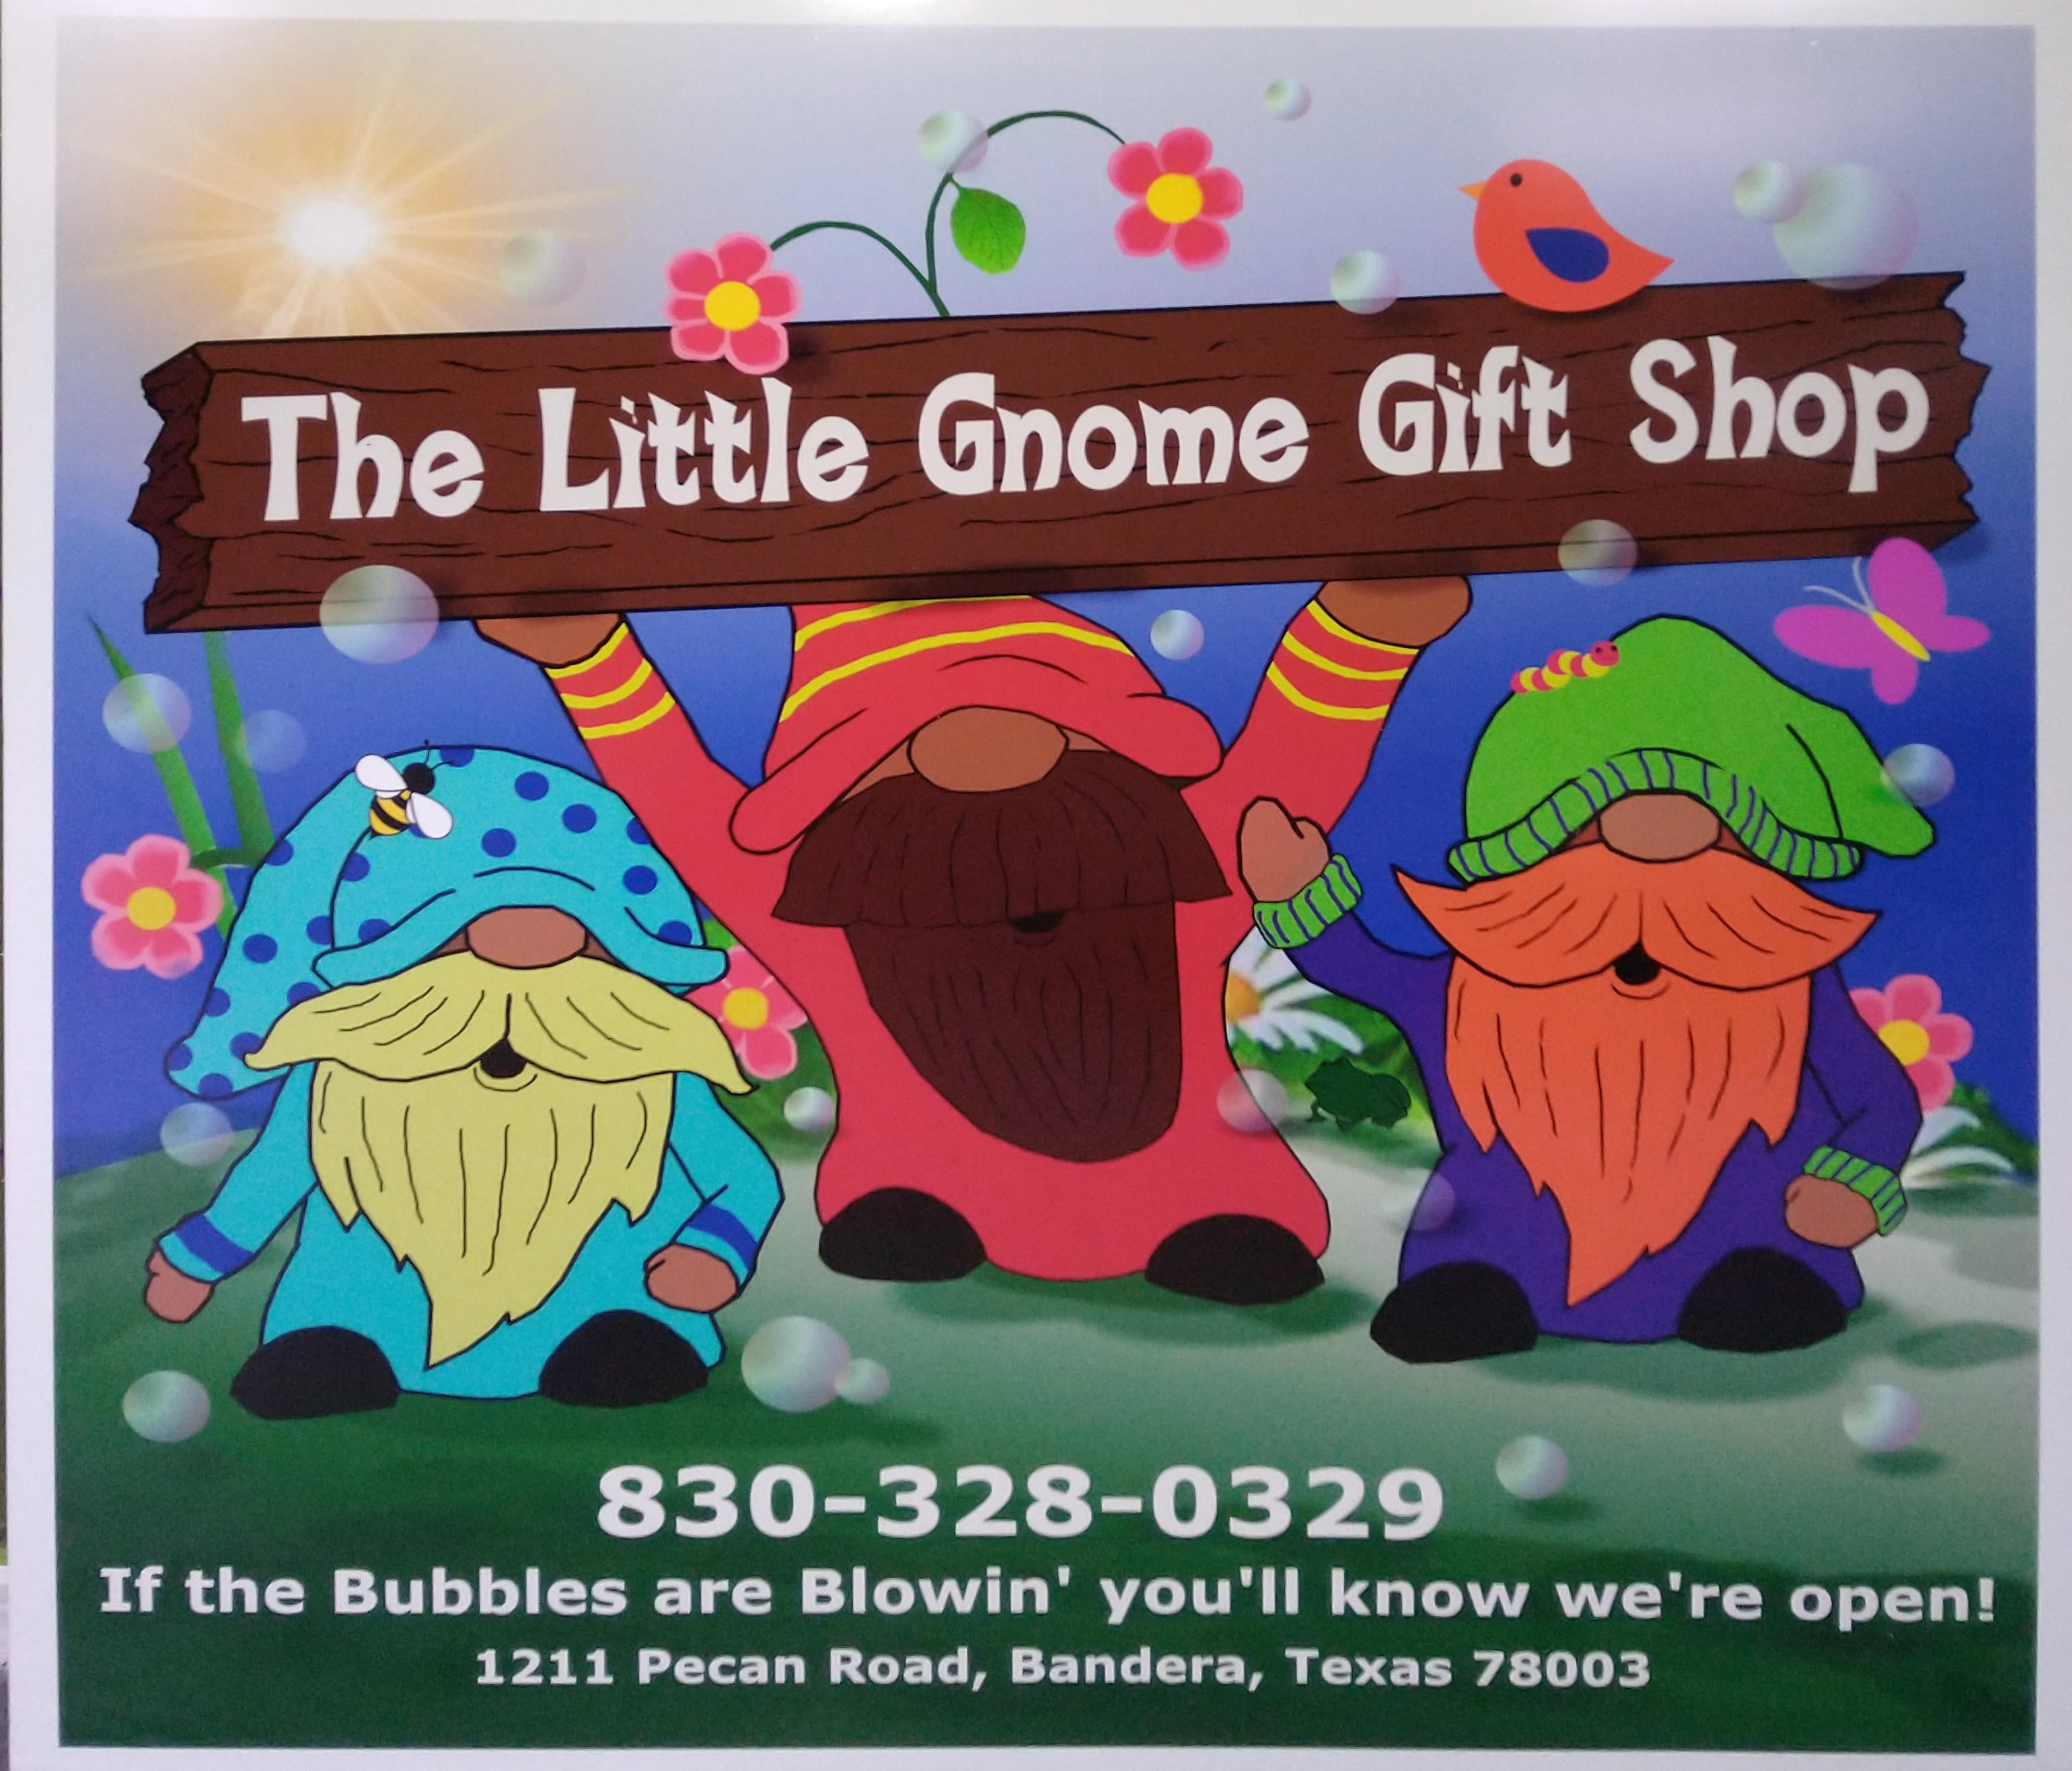 The Little Gnome Gift Shop